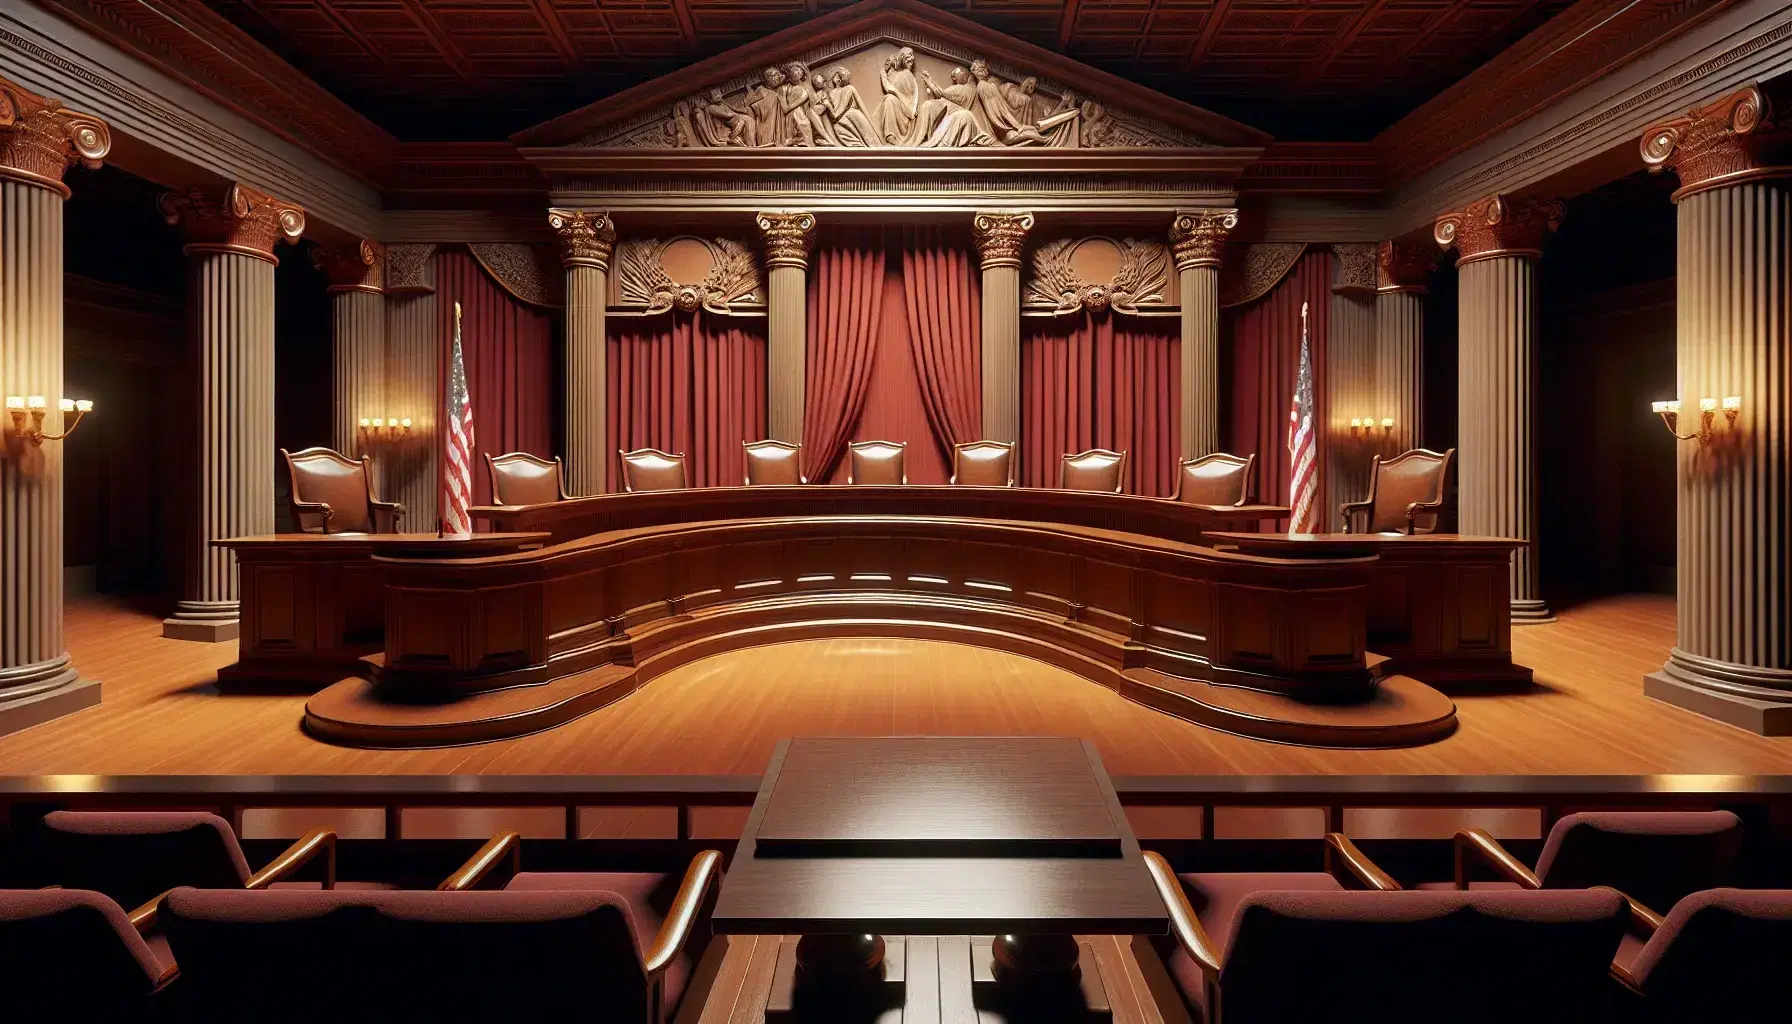 Traditional courtroom interior with an elevated judge's bench, red drapery backdrop, semicircular table arrangement, and two American flags.